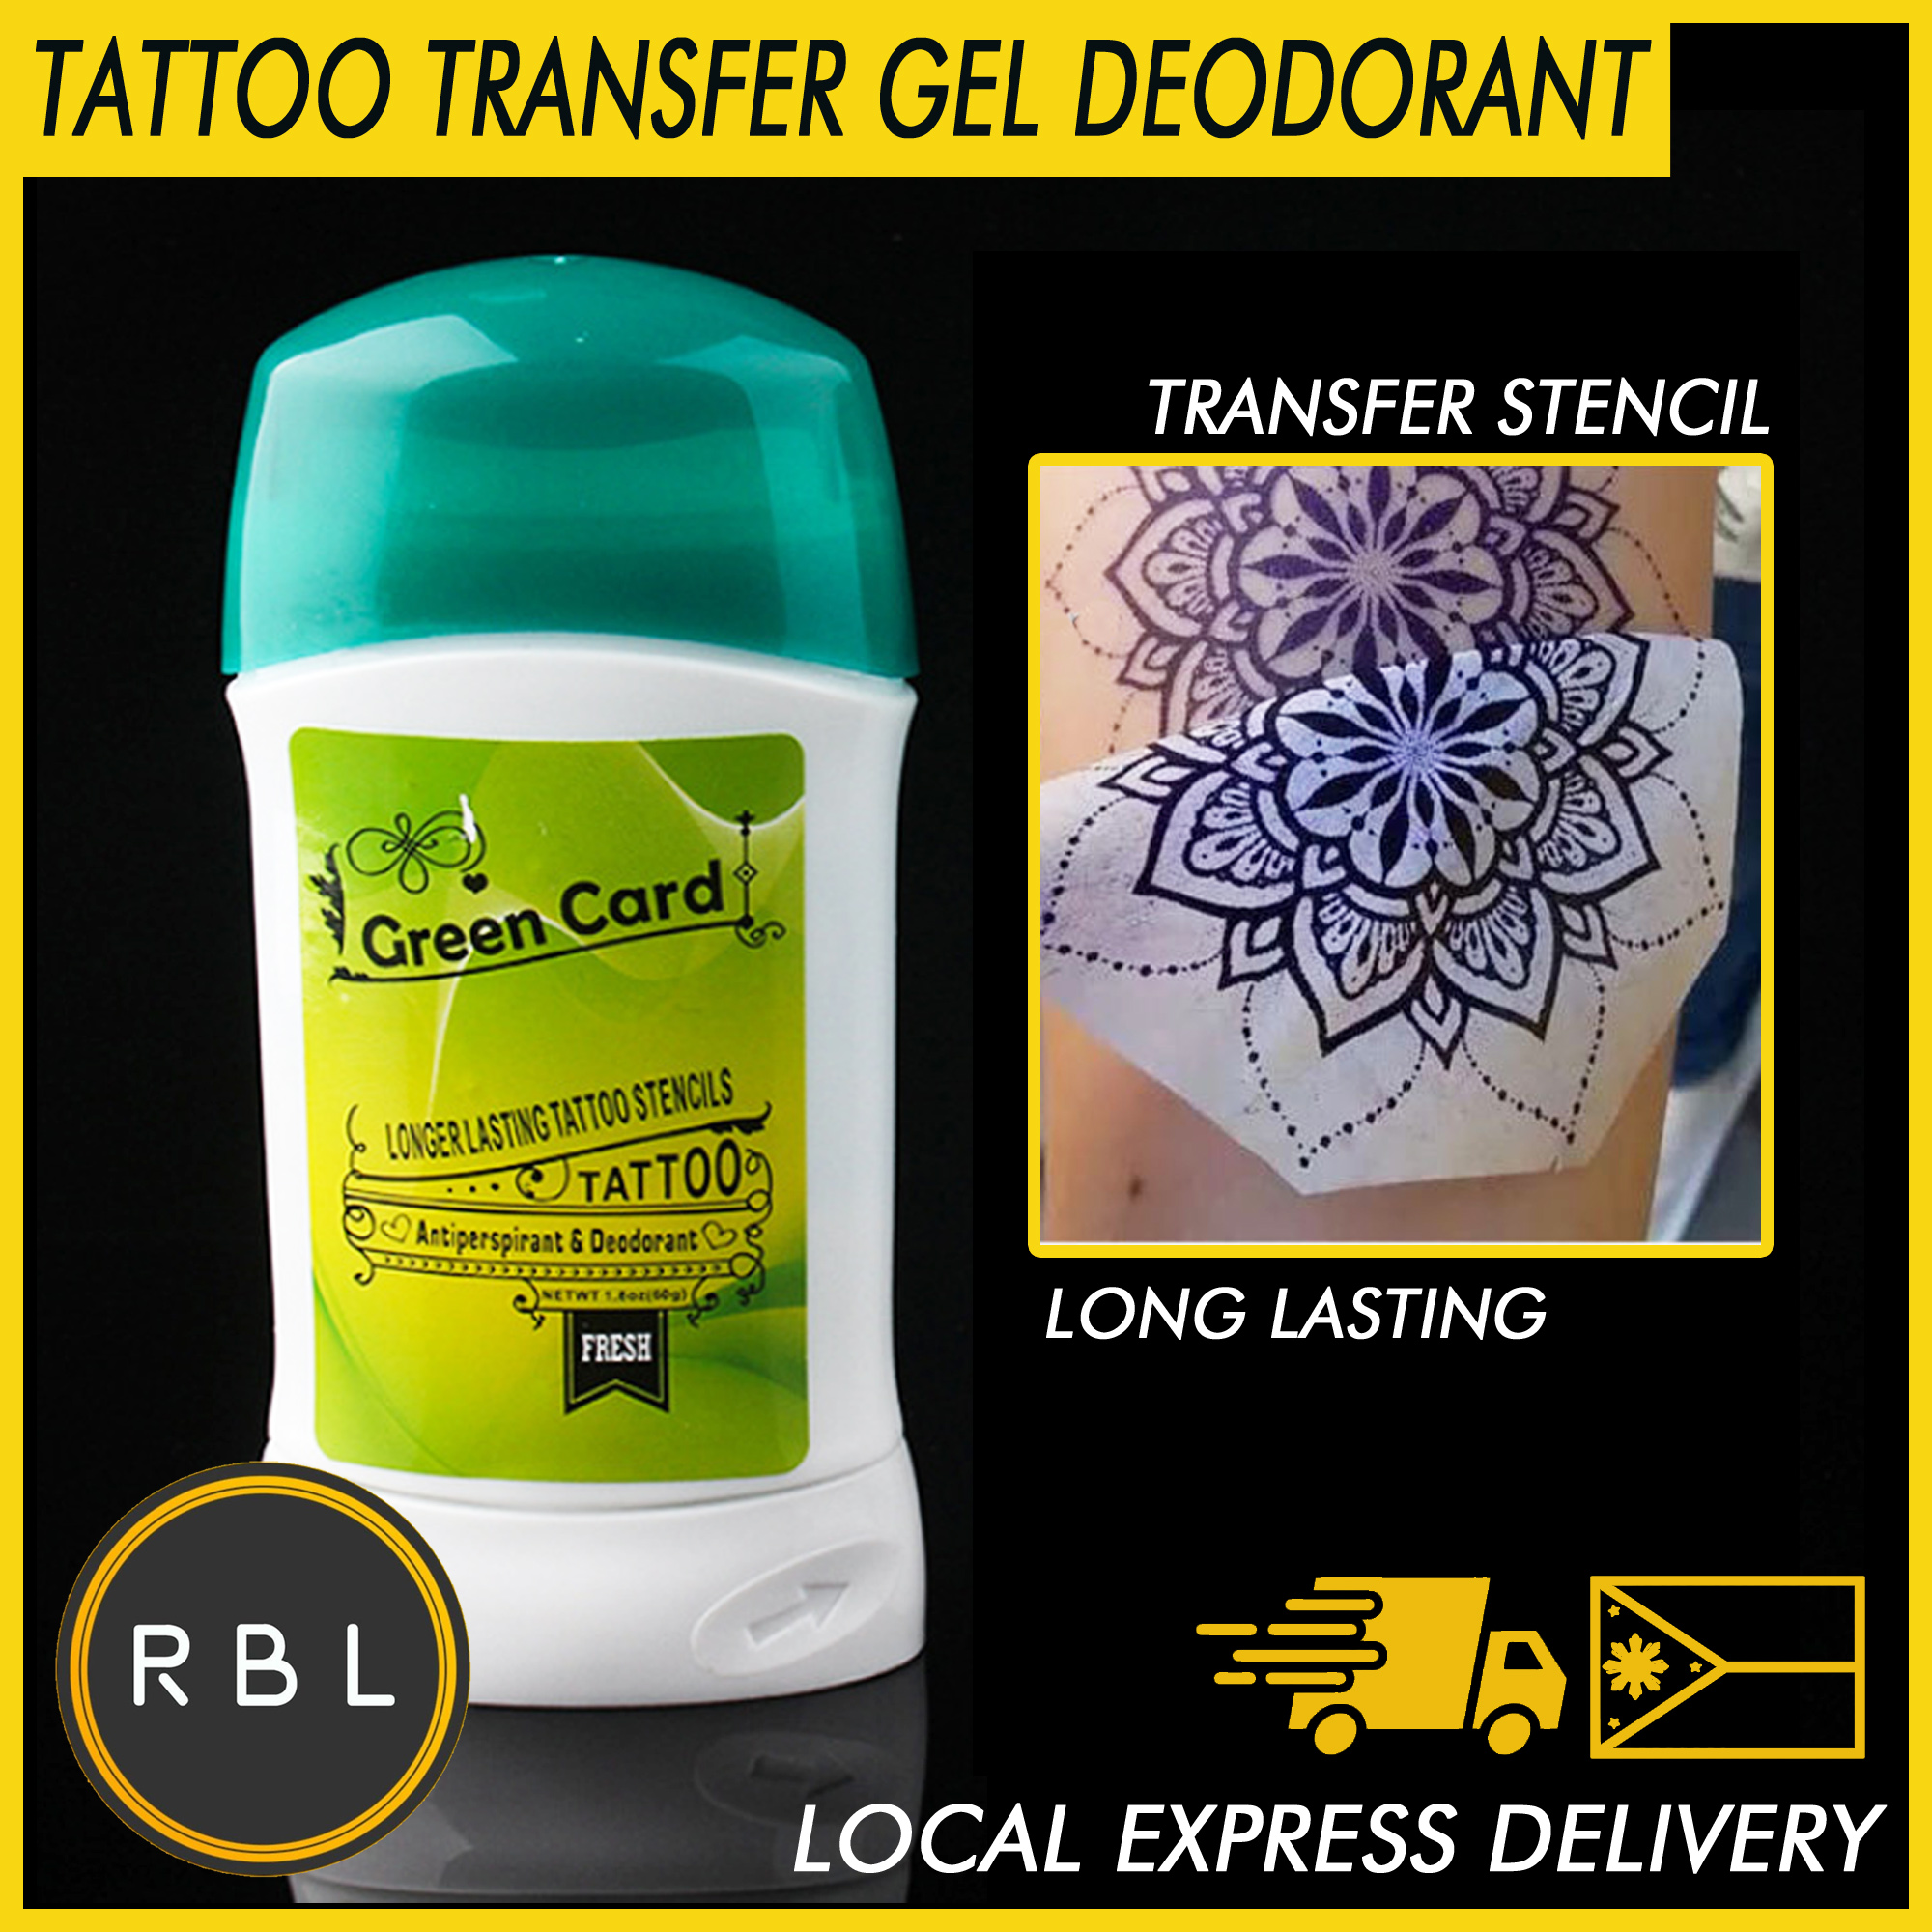 Professional Tattoo Stencil Transfer Gel Solution Cream Tattoo Supplies  Buy Online at Best Price in India  Snapdeal